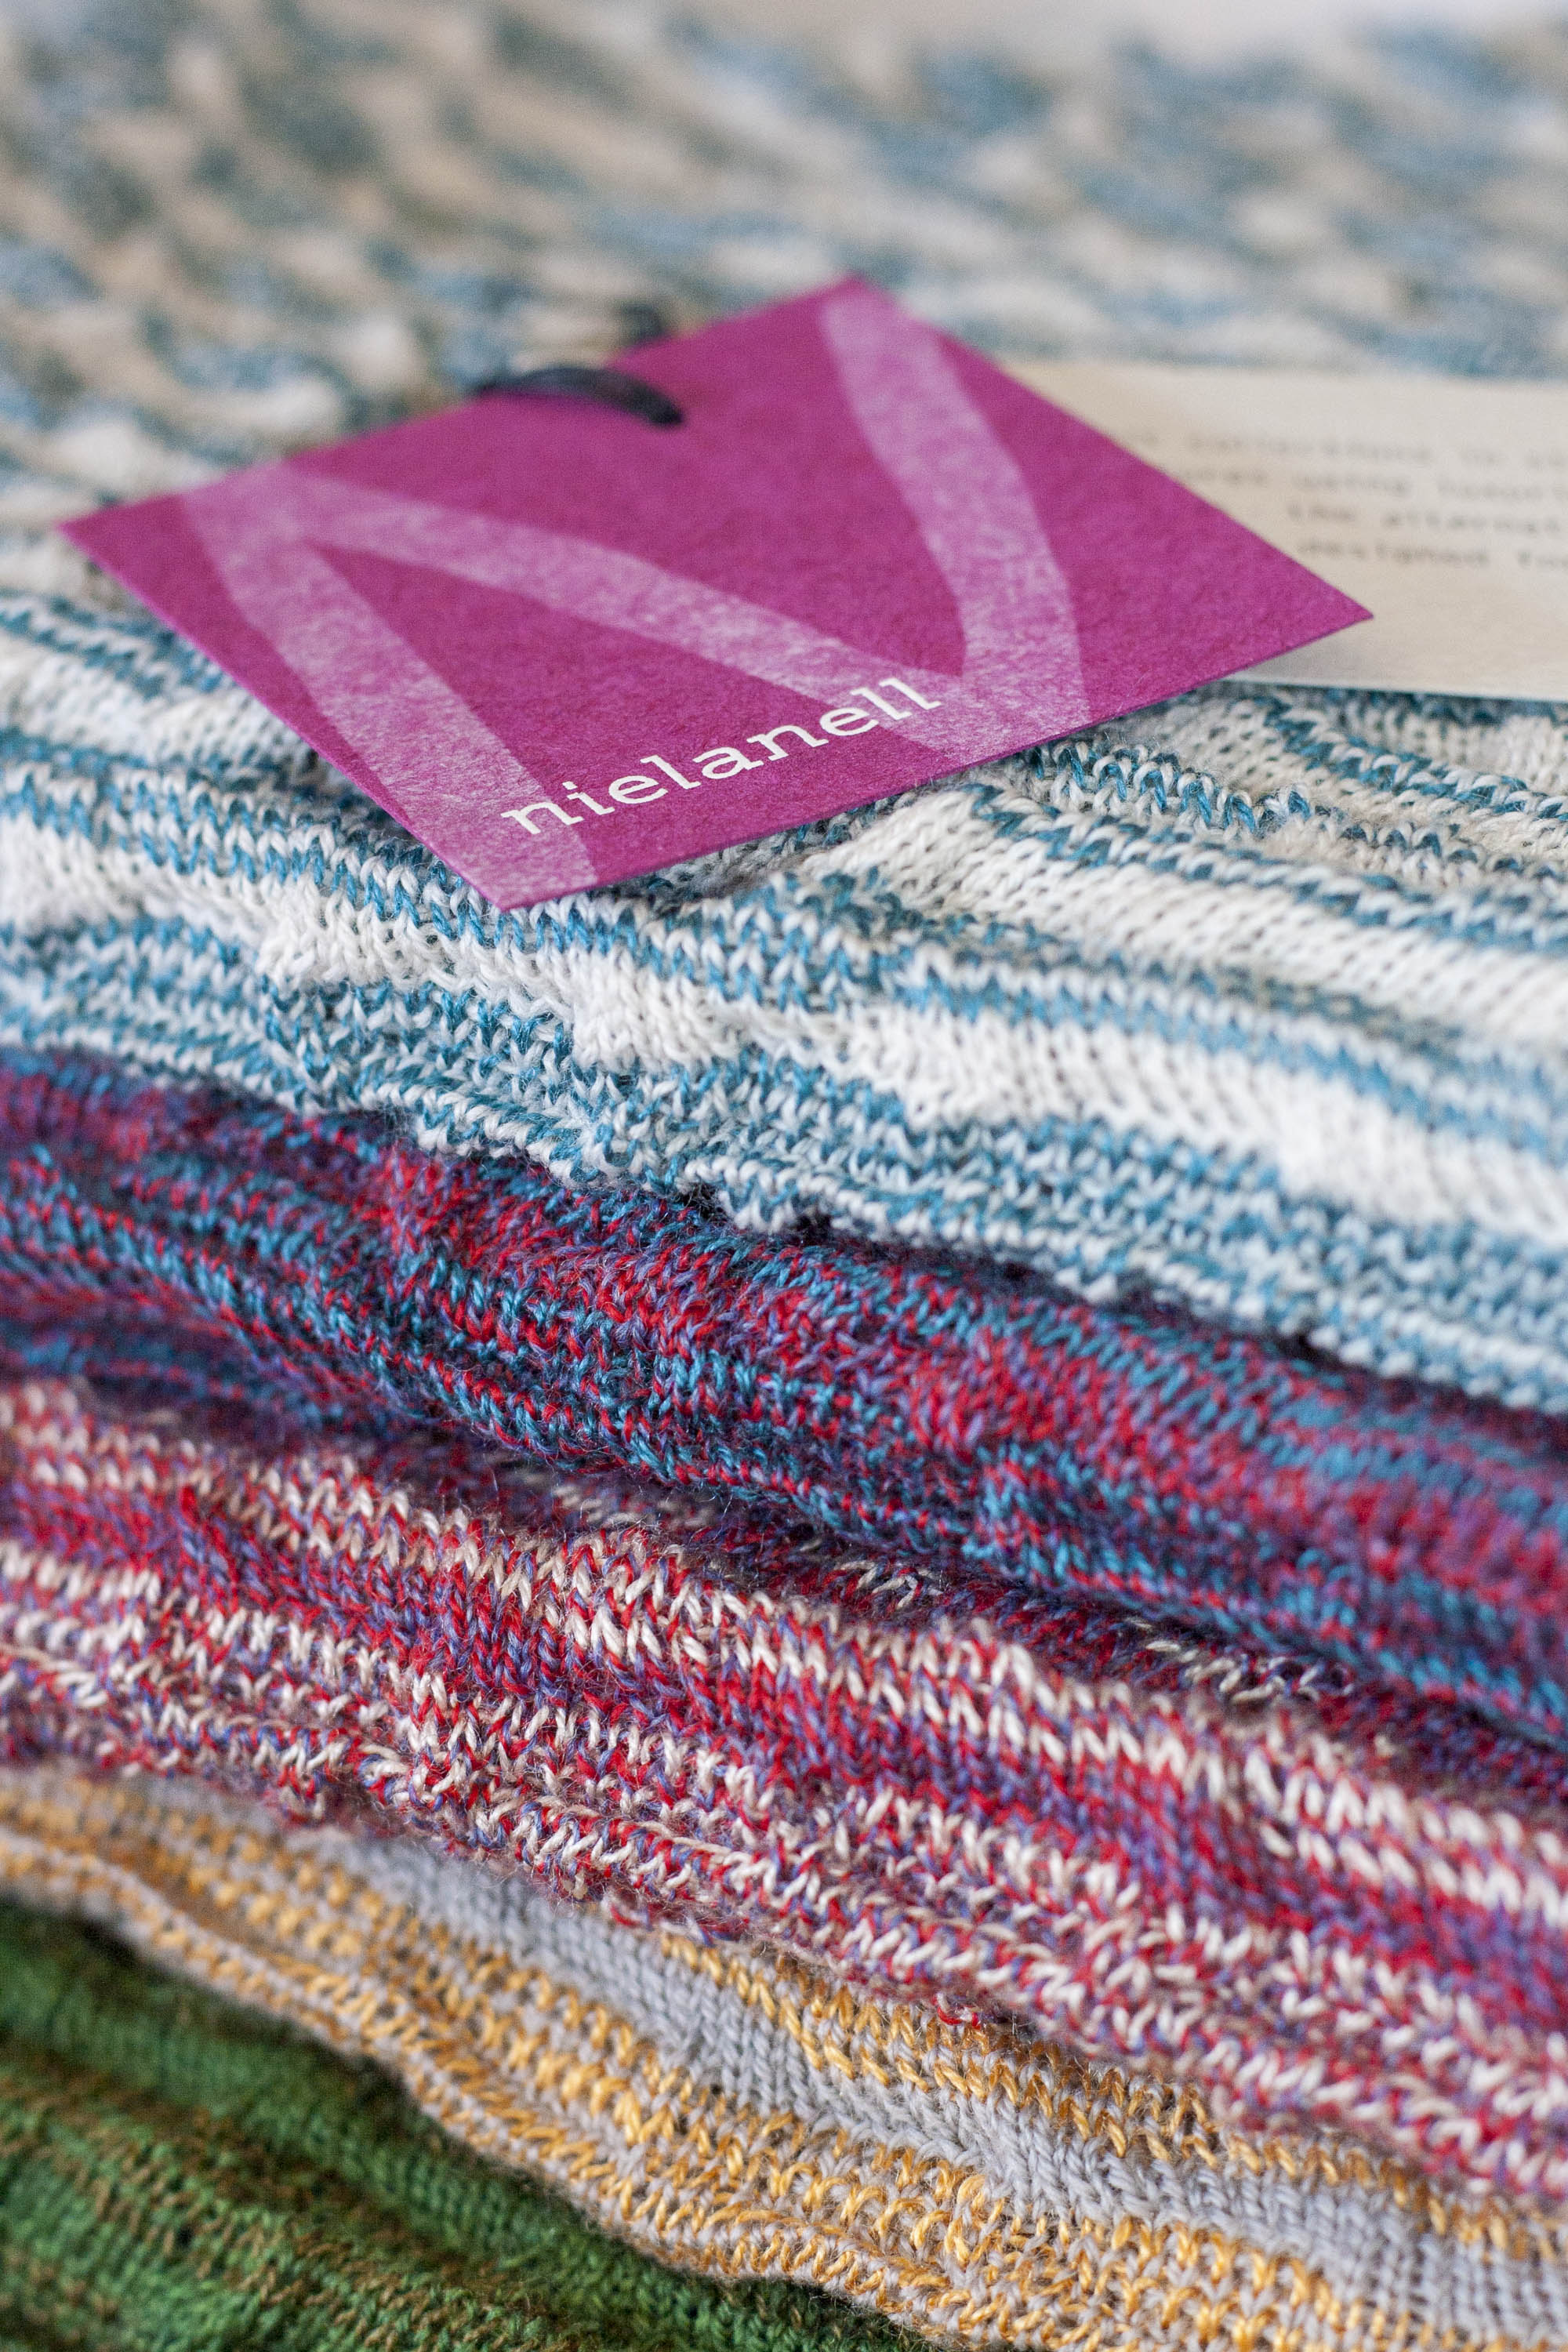 Stack of contemporary, colourful knitwear in the Nielanell studio, Hoswick, Shetland. Greens through pinks to blues. A swing ticket in recycled card is on the top garment. Pink card with white N and logo.